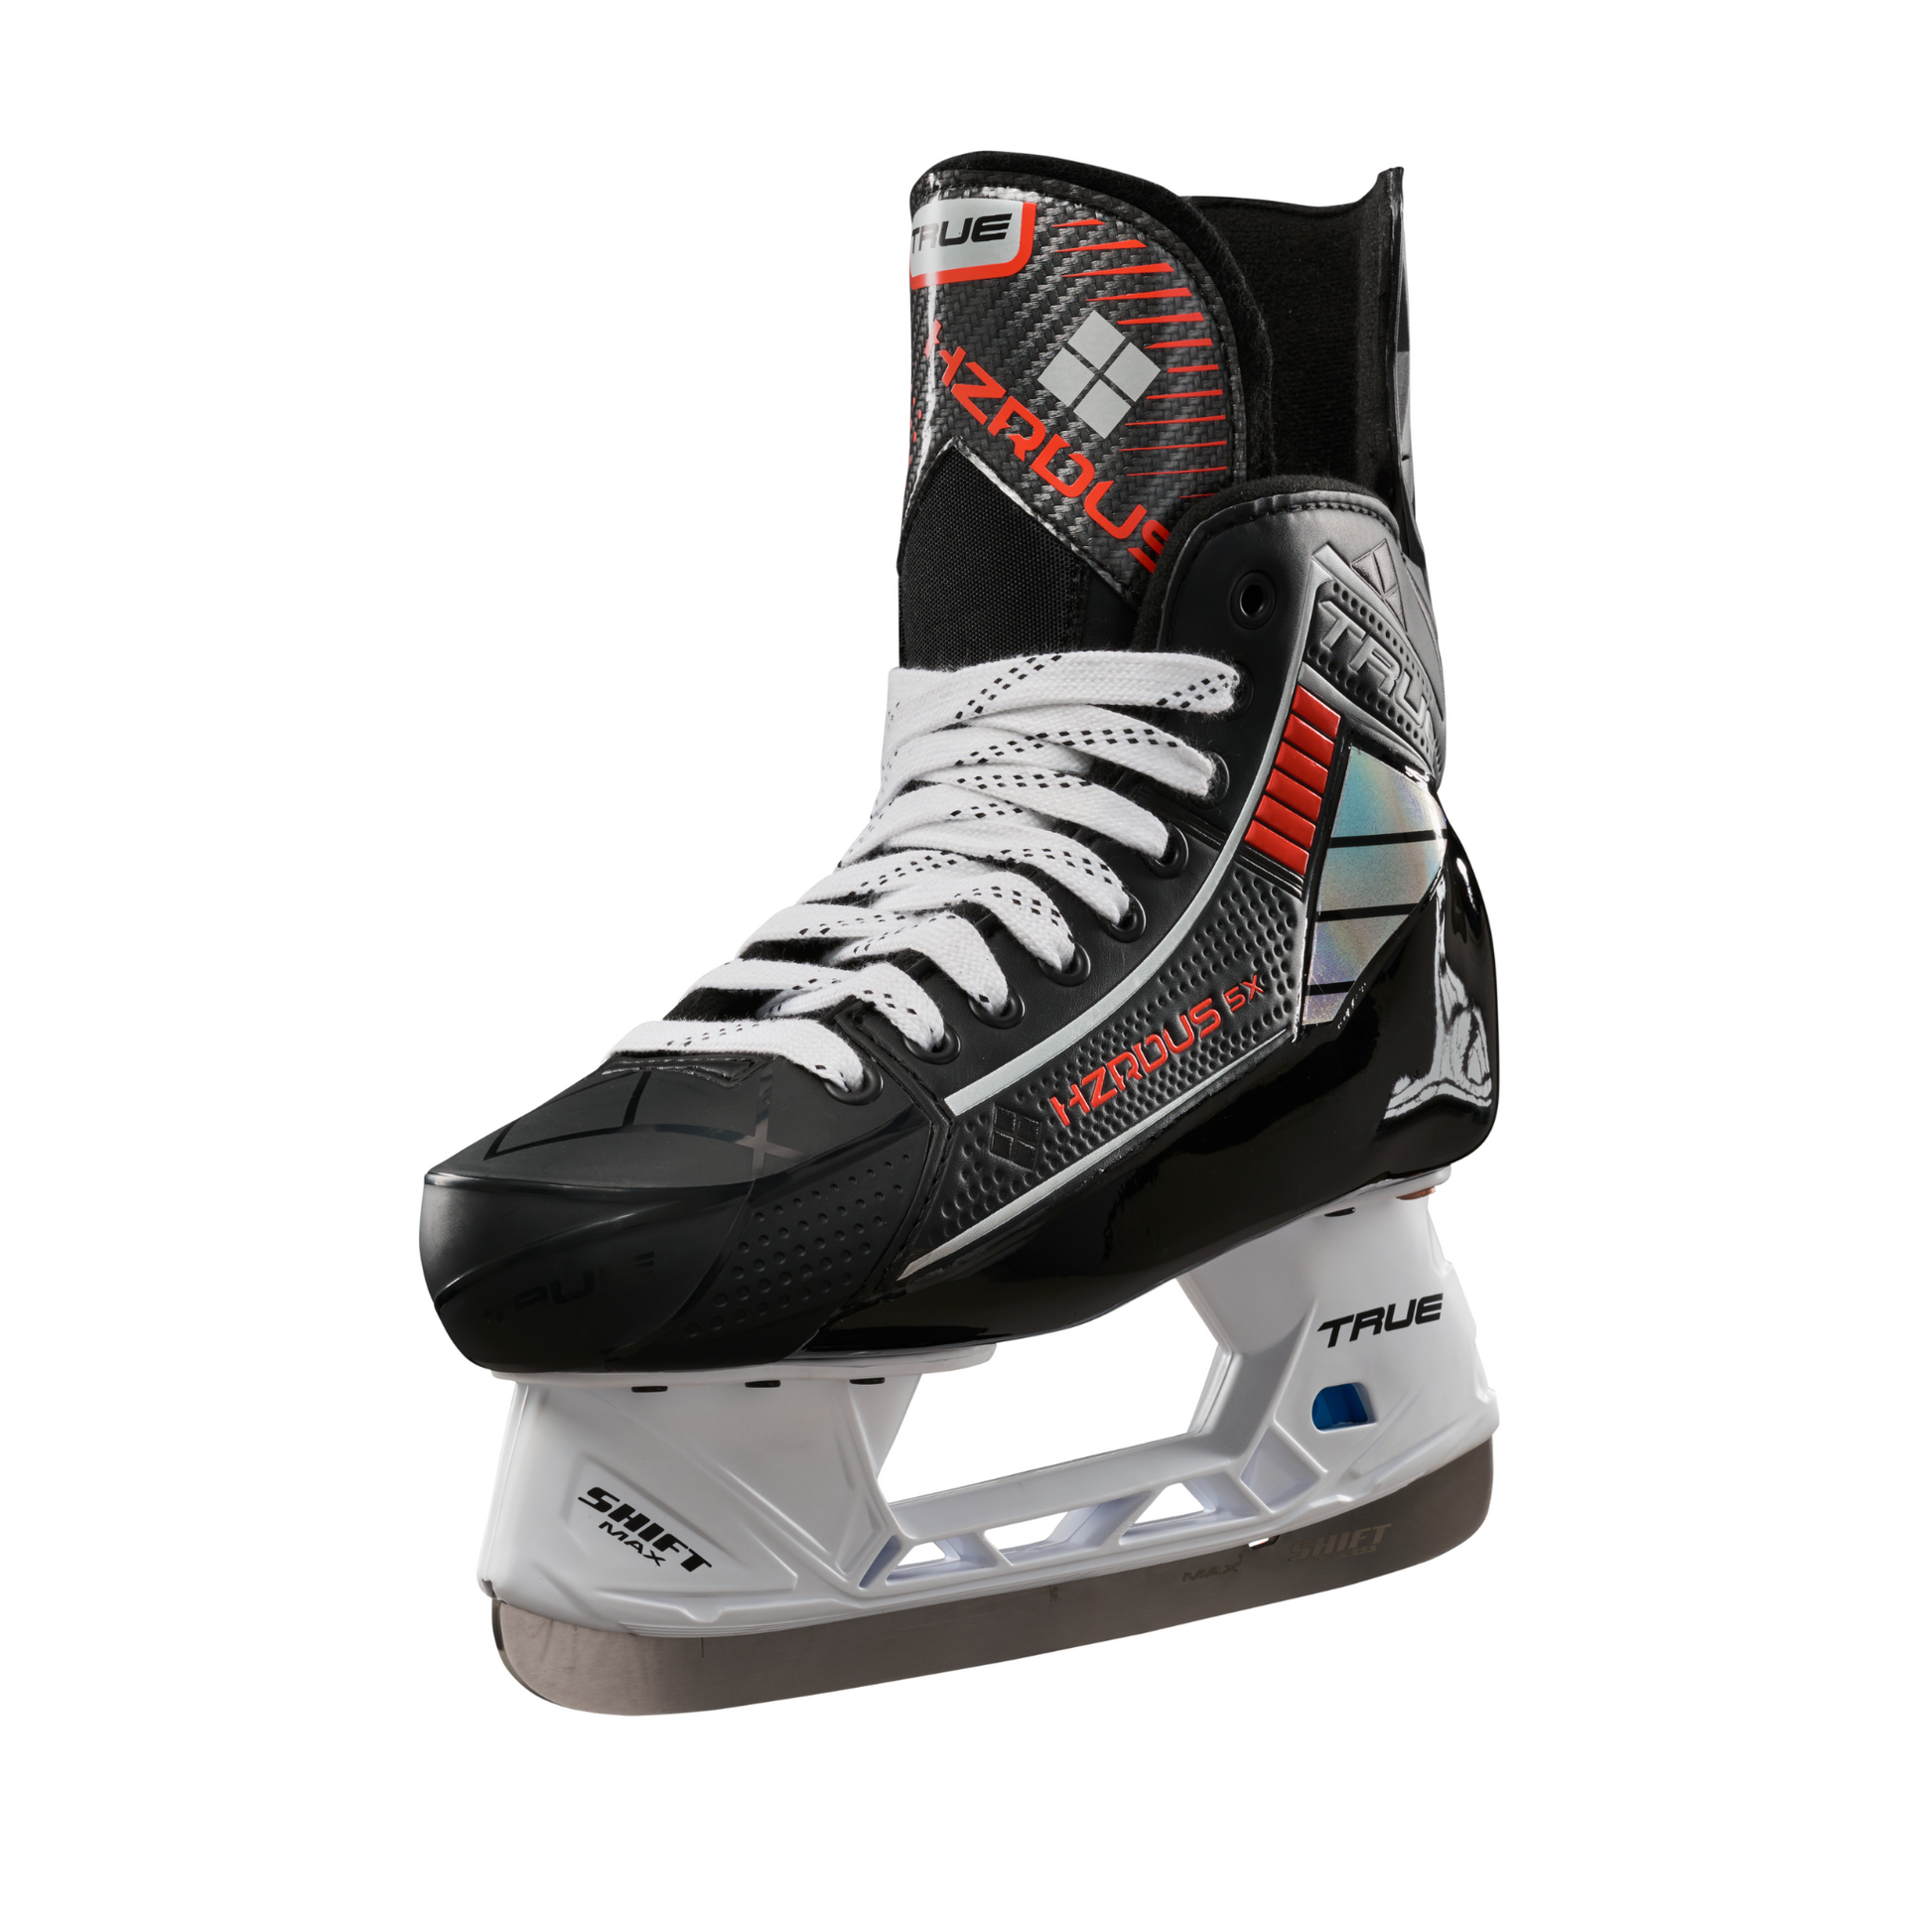 A photo of the True HZERDUS 5X Senior Hockey Skate in colour black and red angled view.